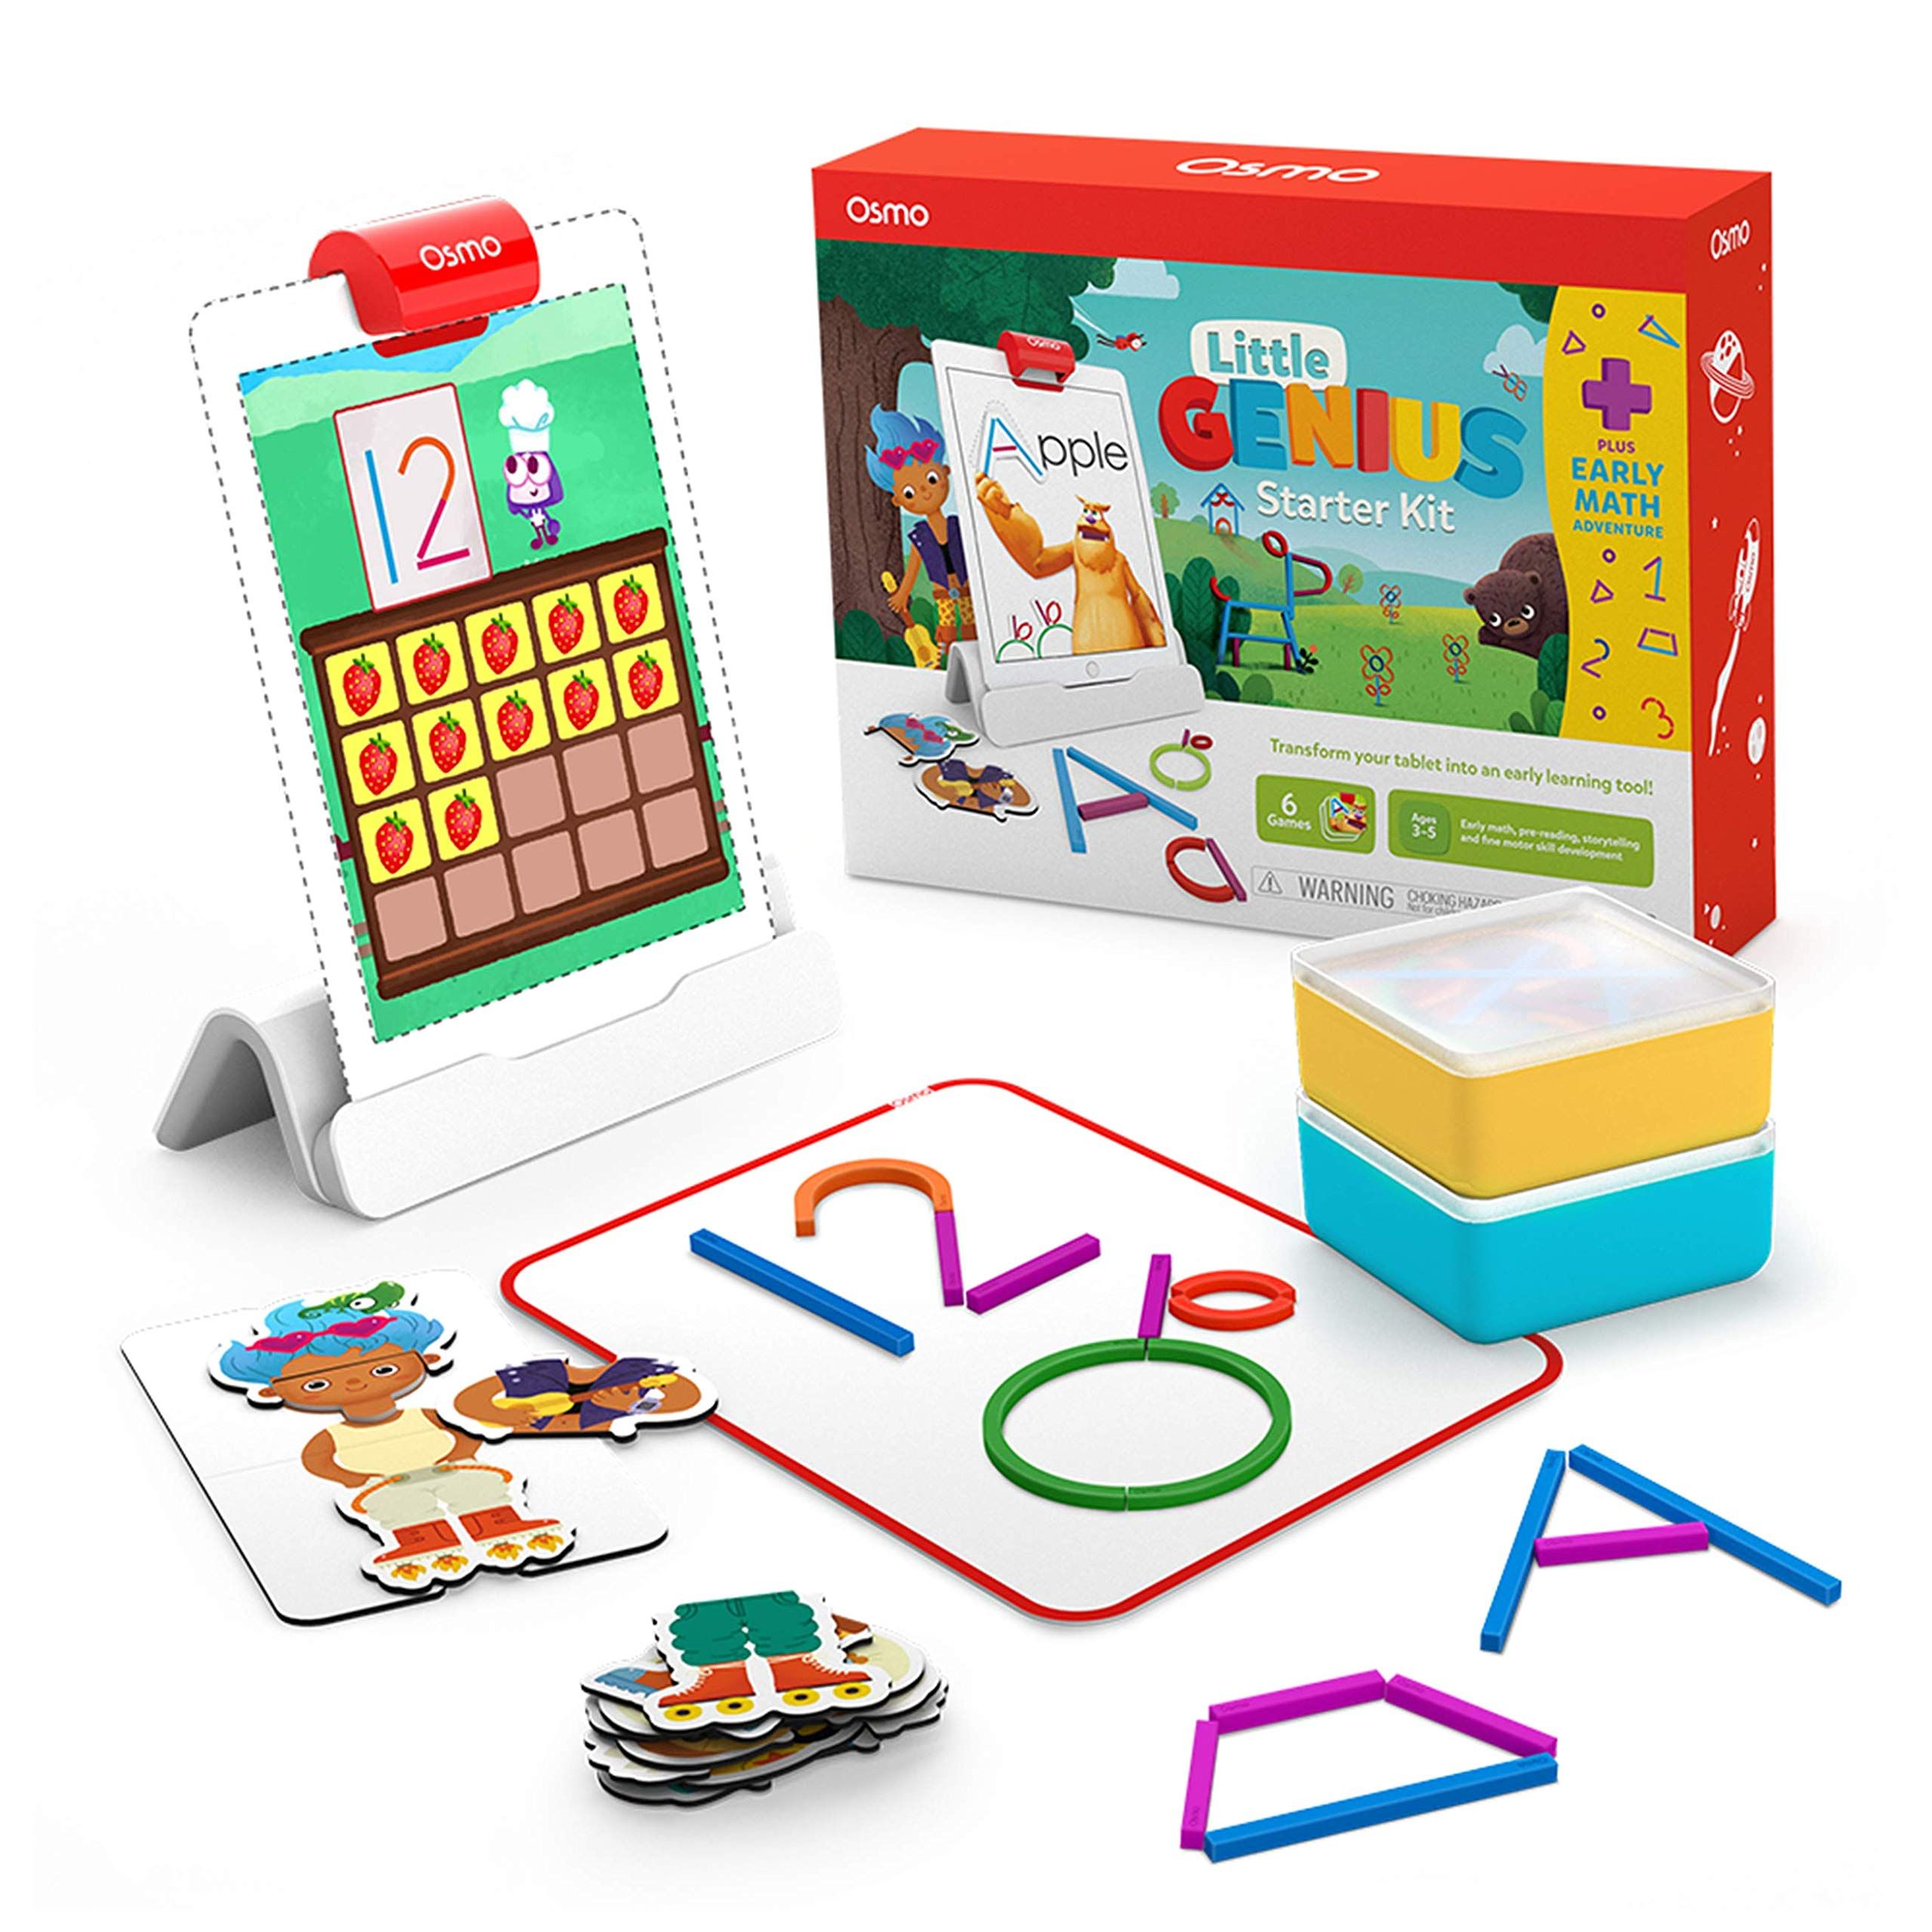 Osmo - Little Genius Starter Kit for iPad + Early Math Adventure - 6 Educational Learning Games - Ag | Amazon (US)